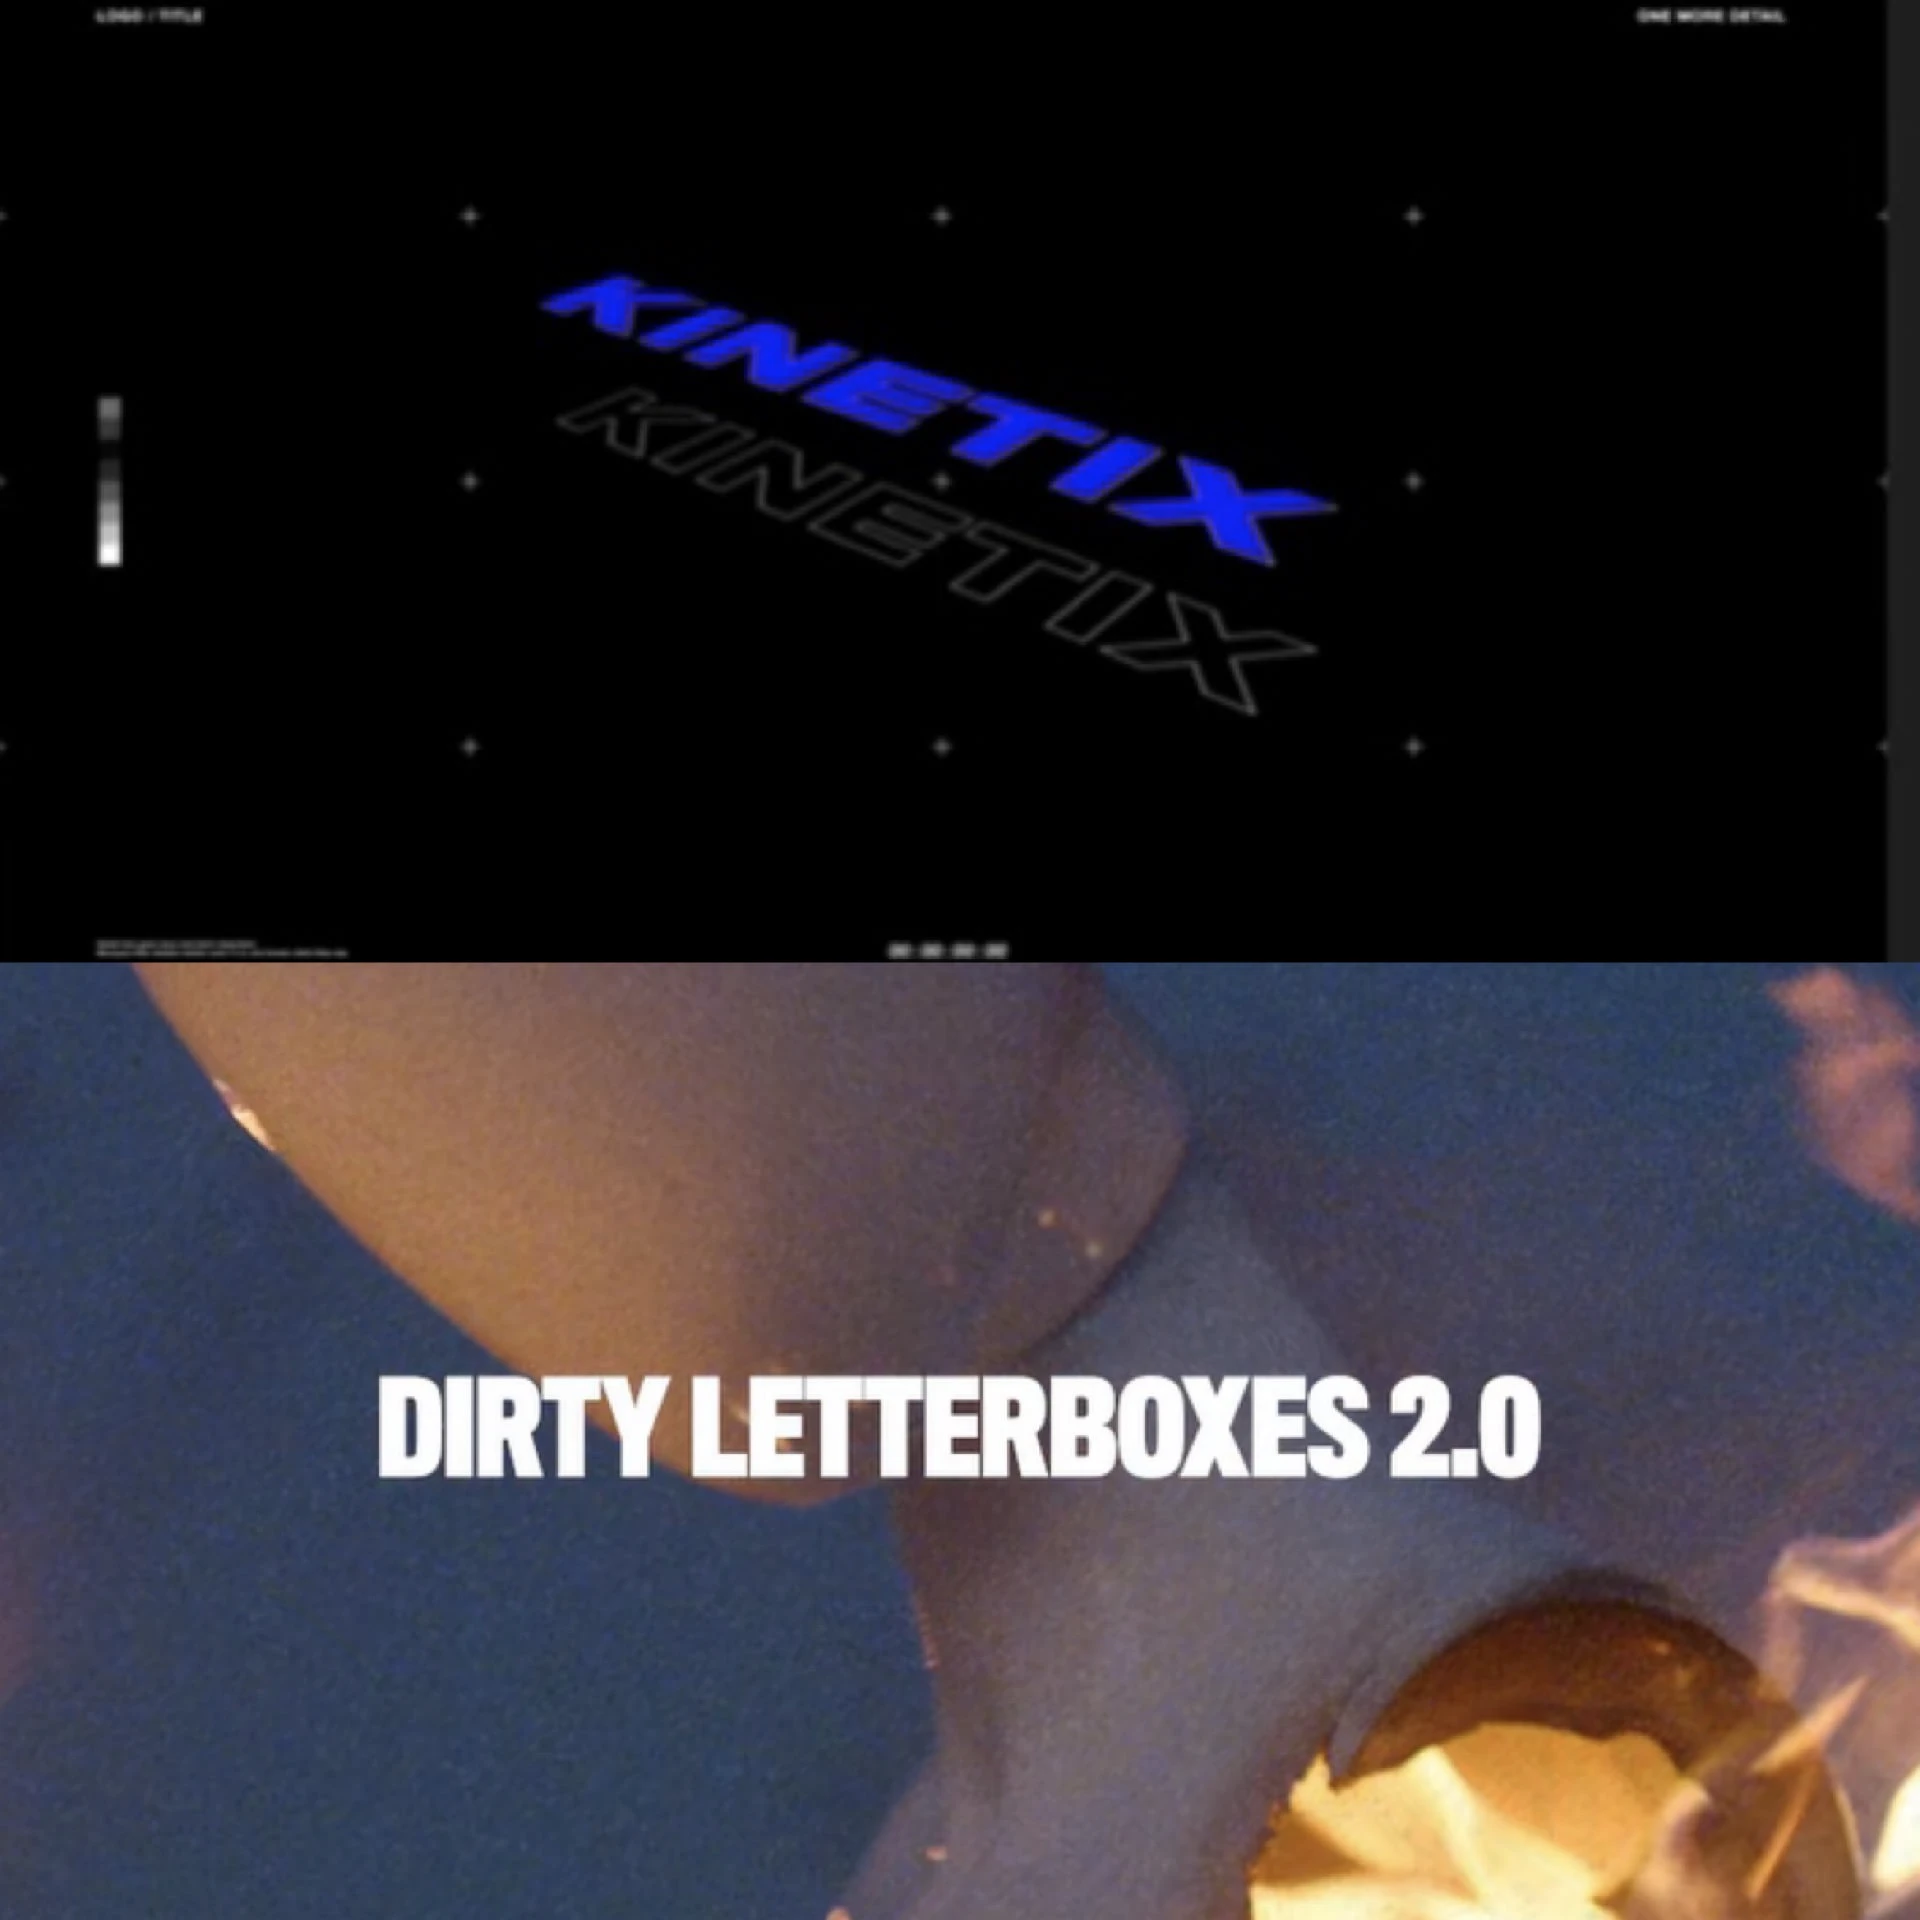 KINETX + Dirty Letter-boxes 2.0<